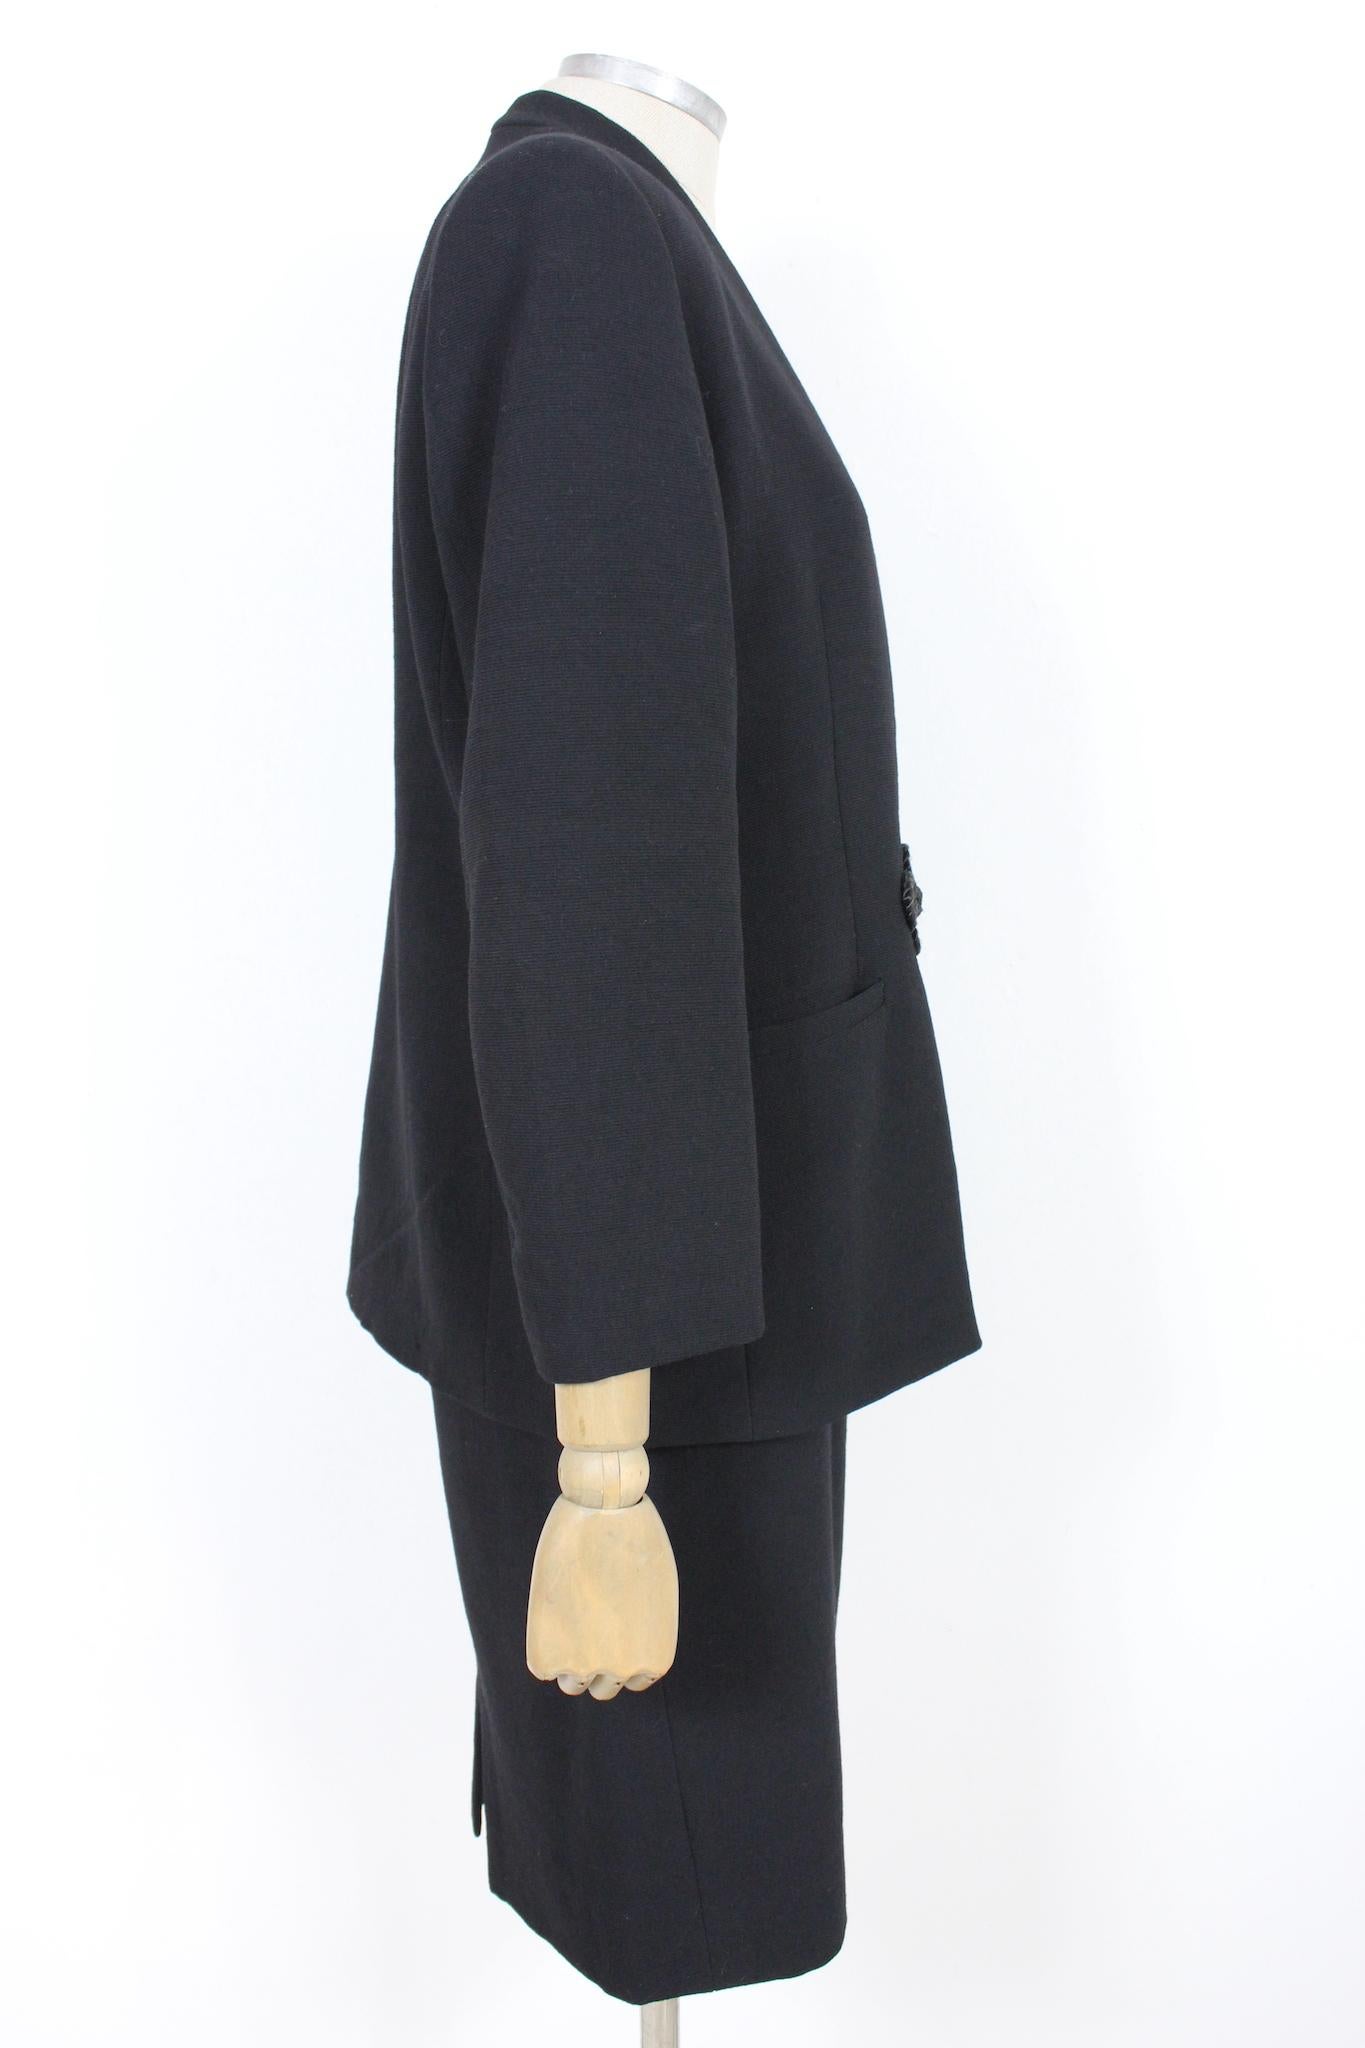 Pierre Cardin Black Elegant Skirt Suit 1980s In Excellent Condition For Sale In Brindisi, Bt